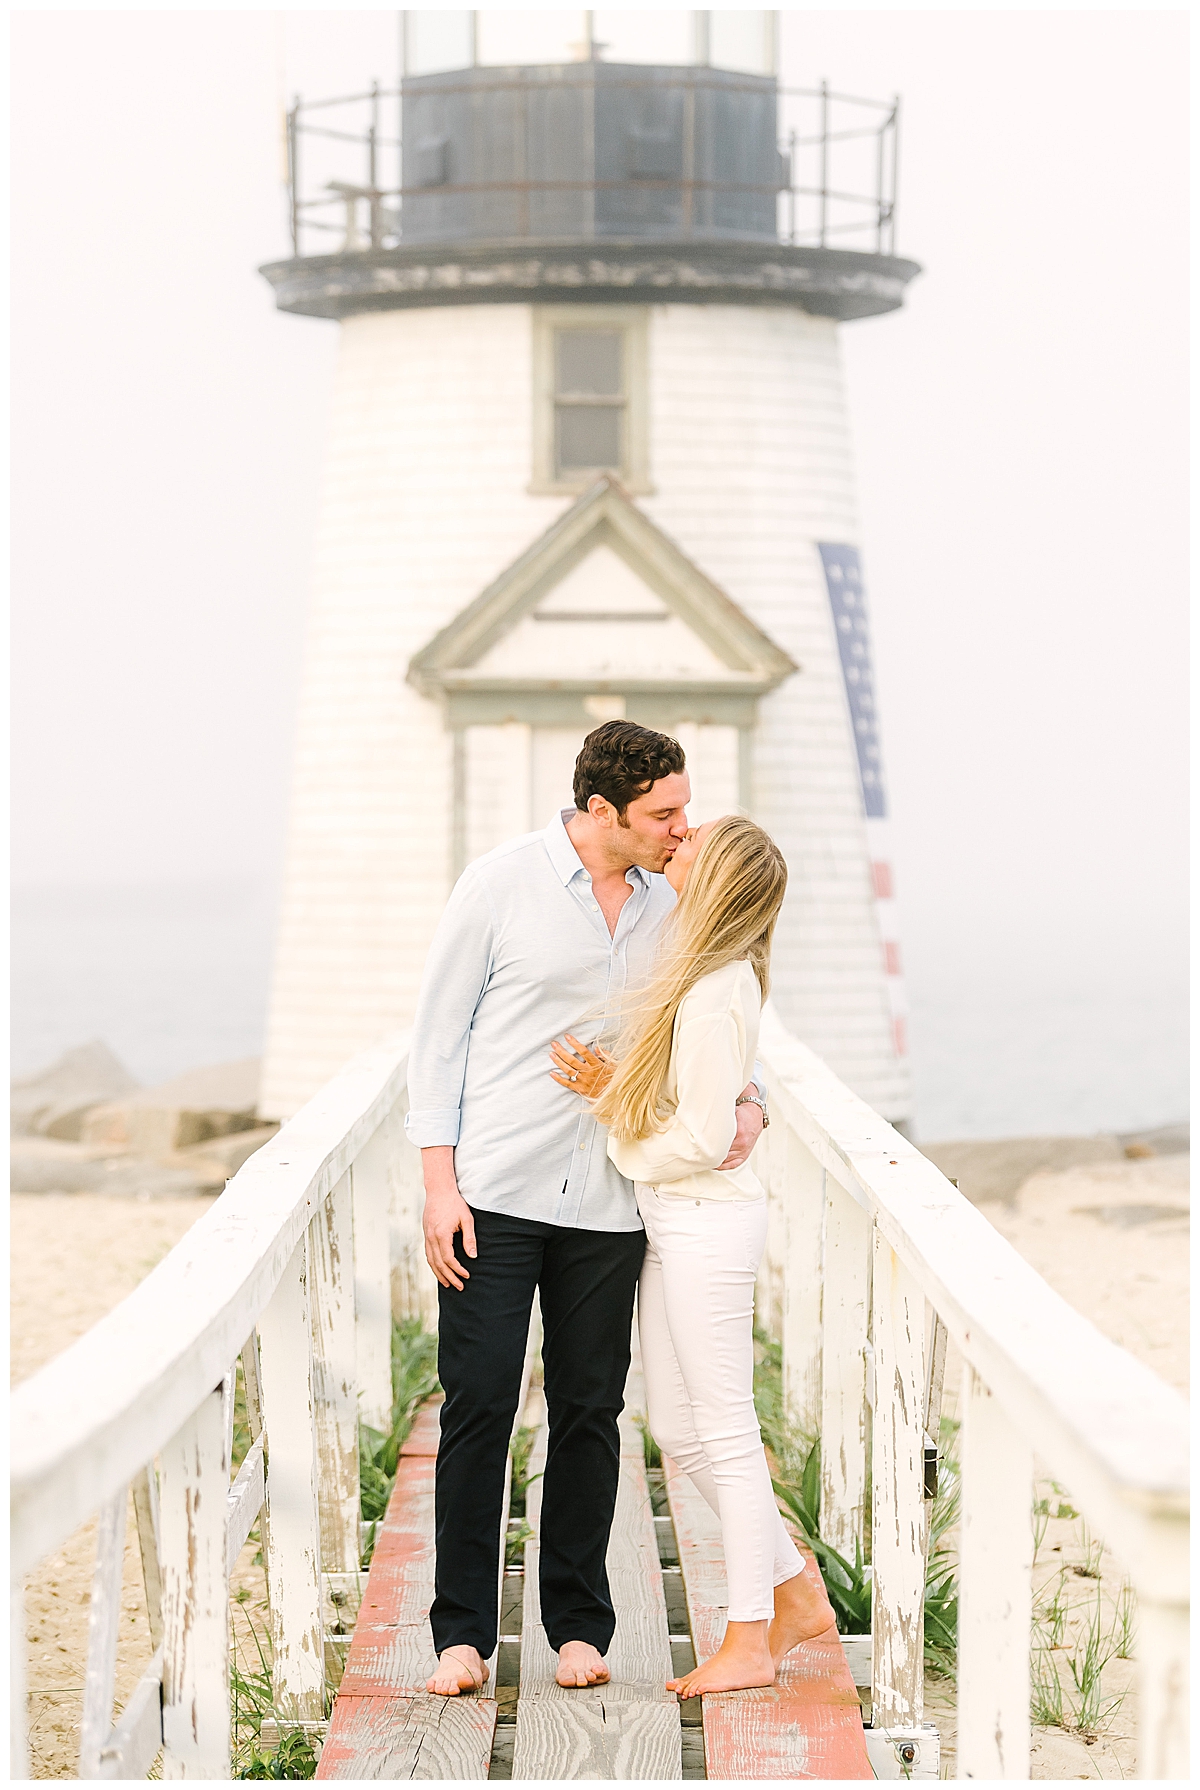 Colby and Haley's Nantucket Proposal